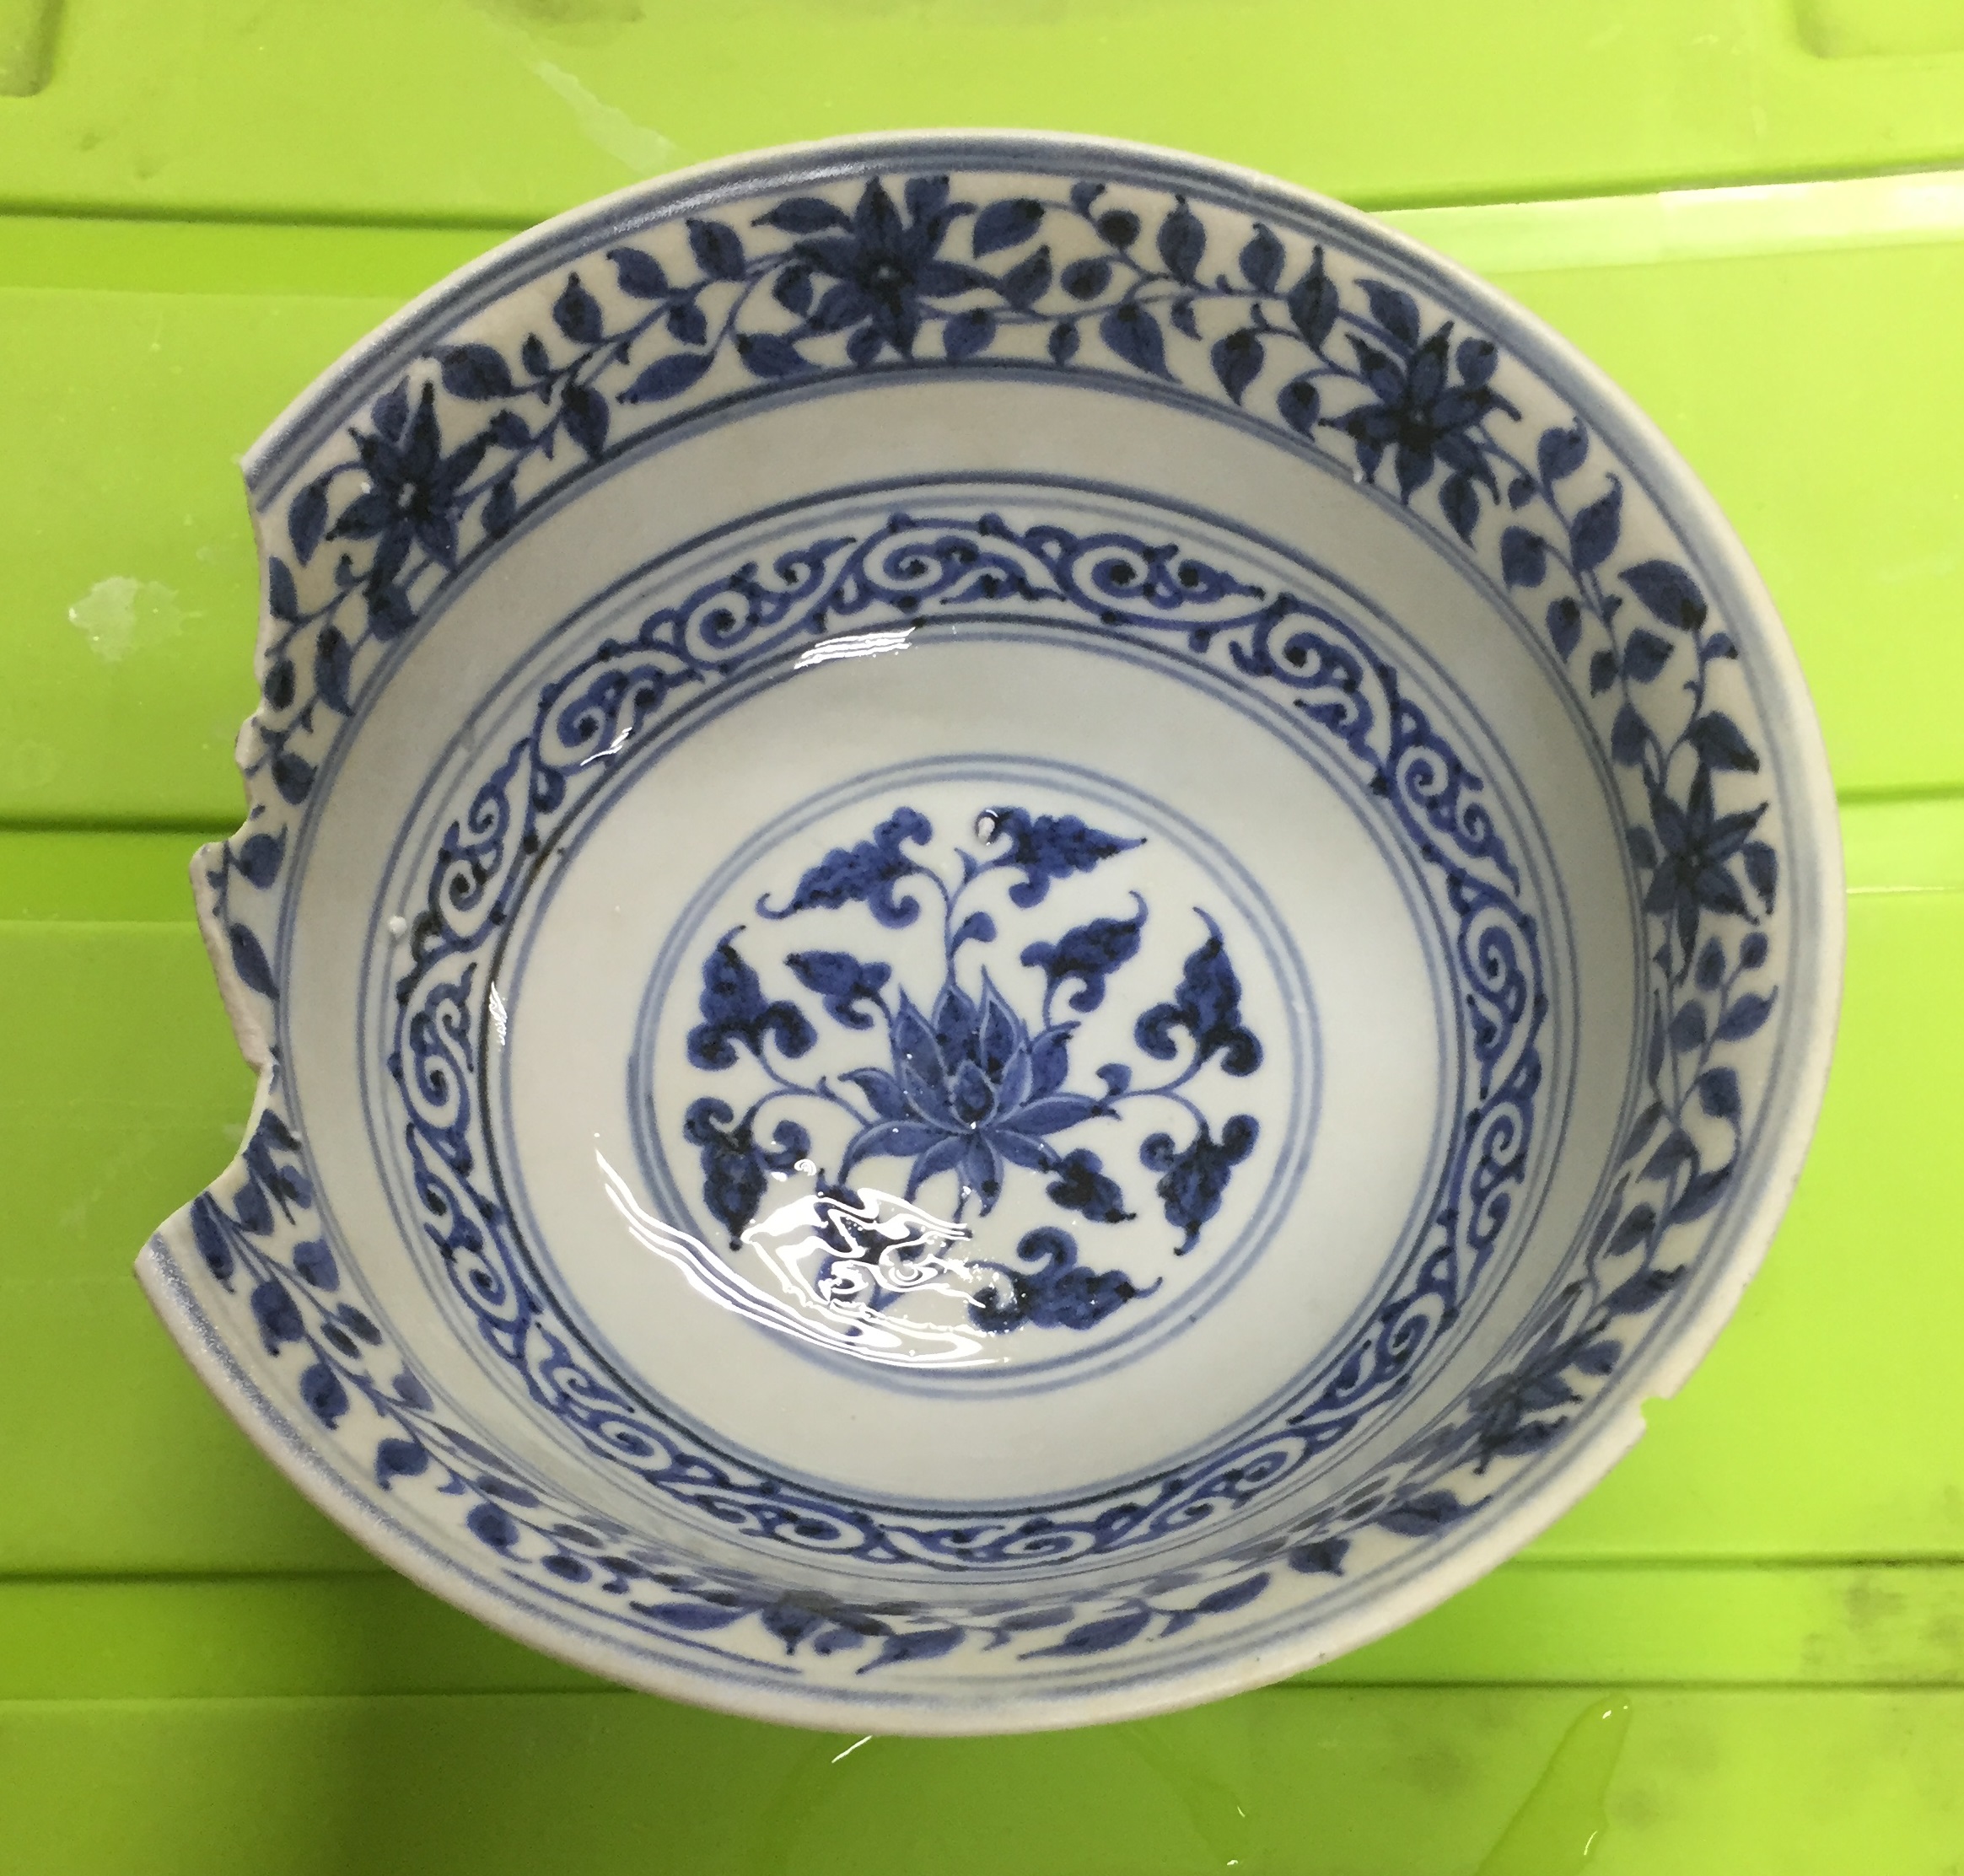 Nearly intact blue-and-white bowl with alternating lotus and scroll decoration from SW1